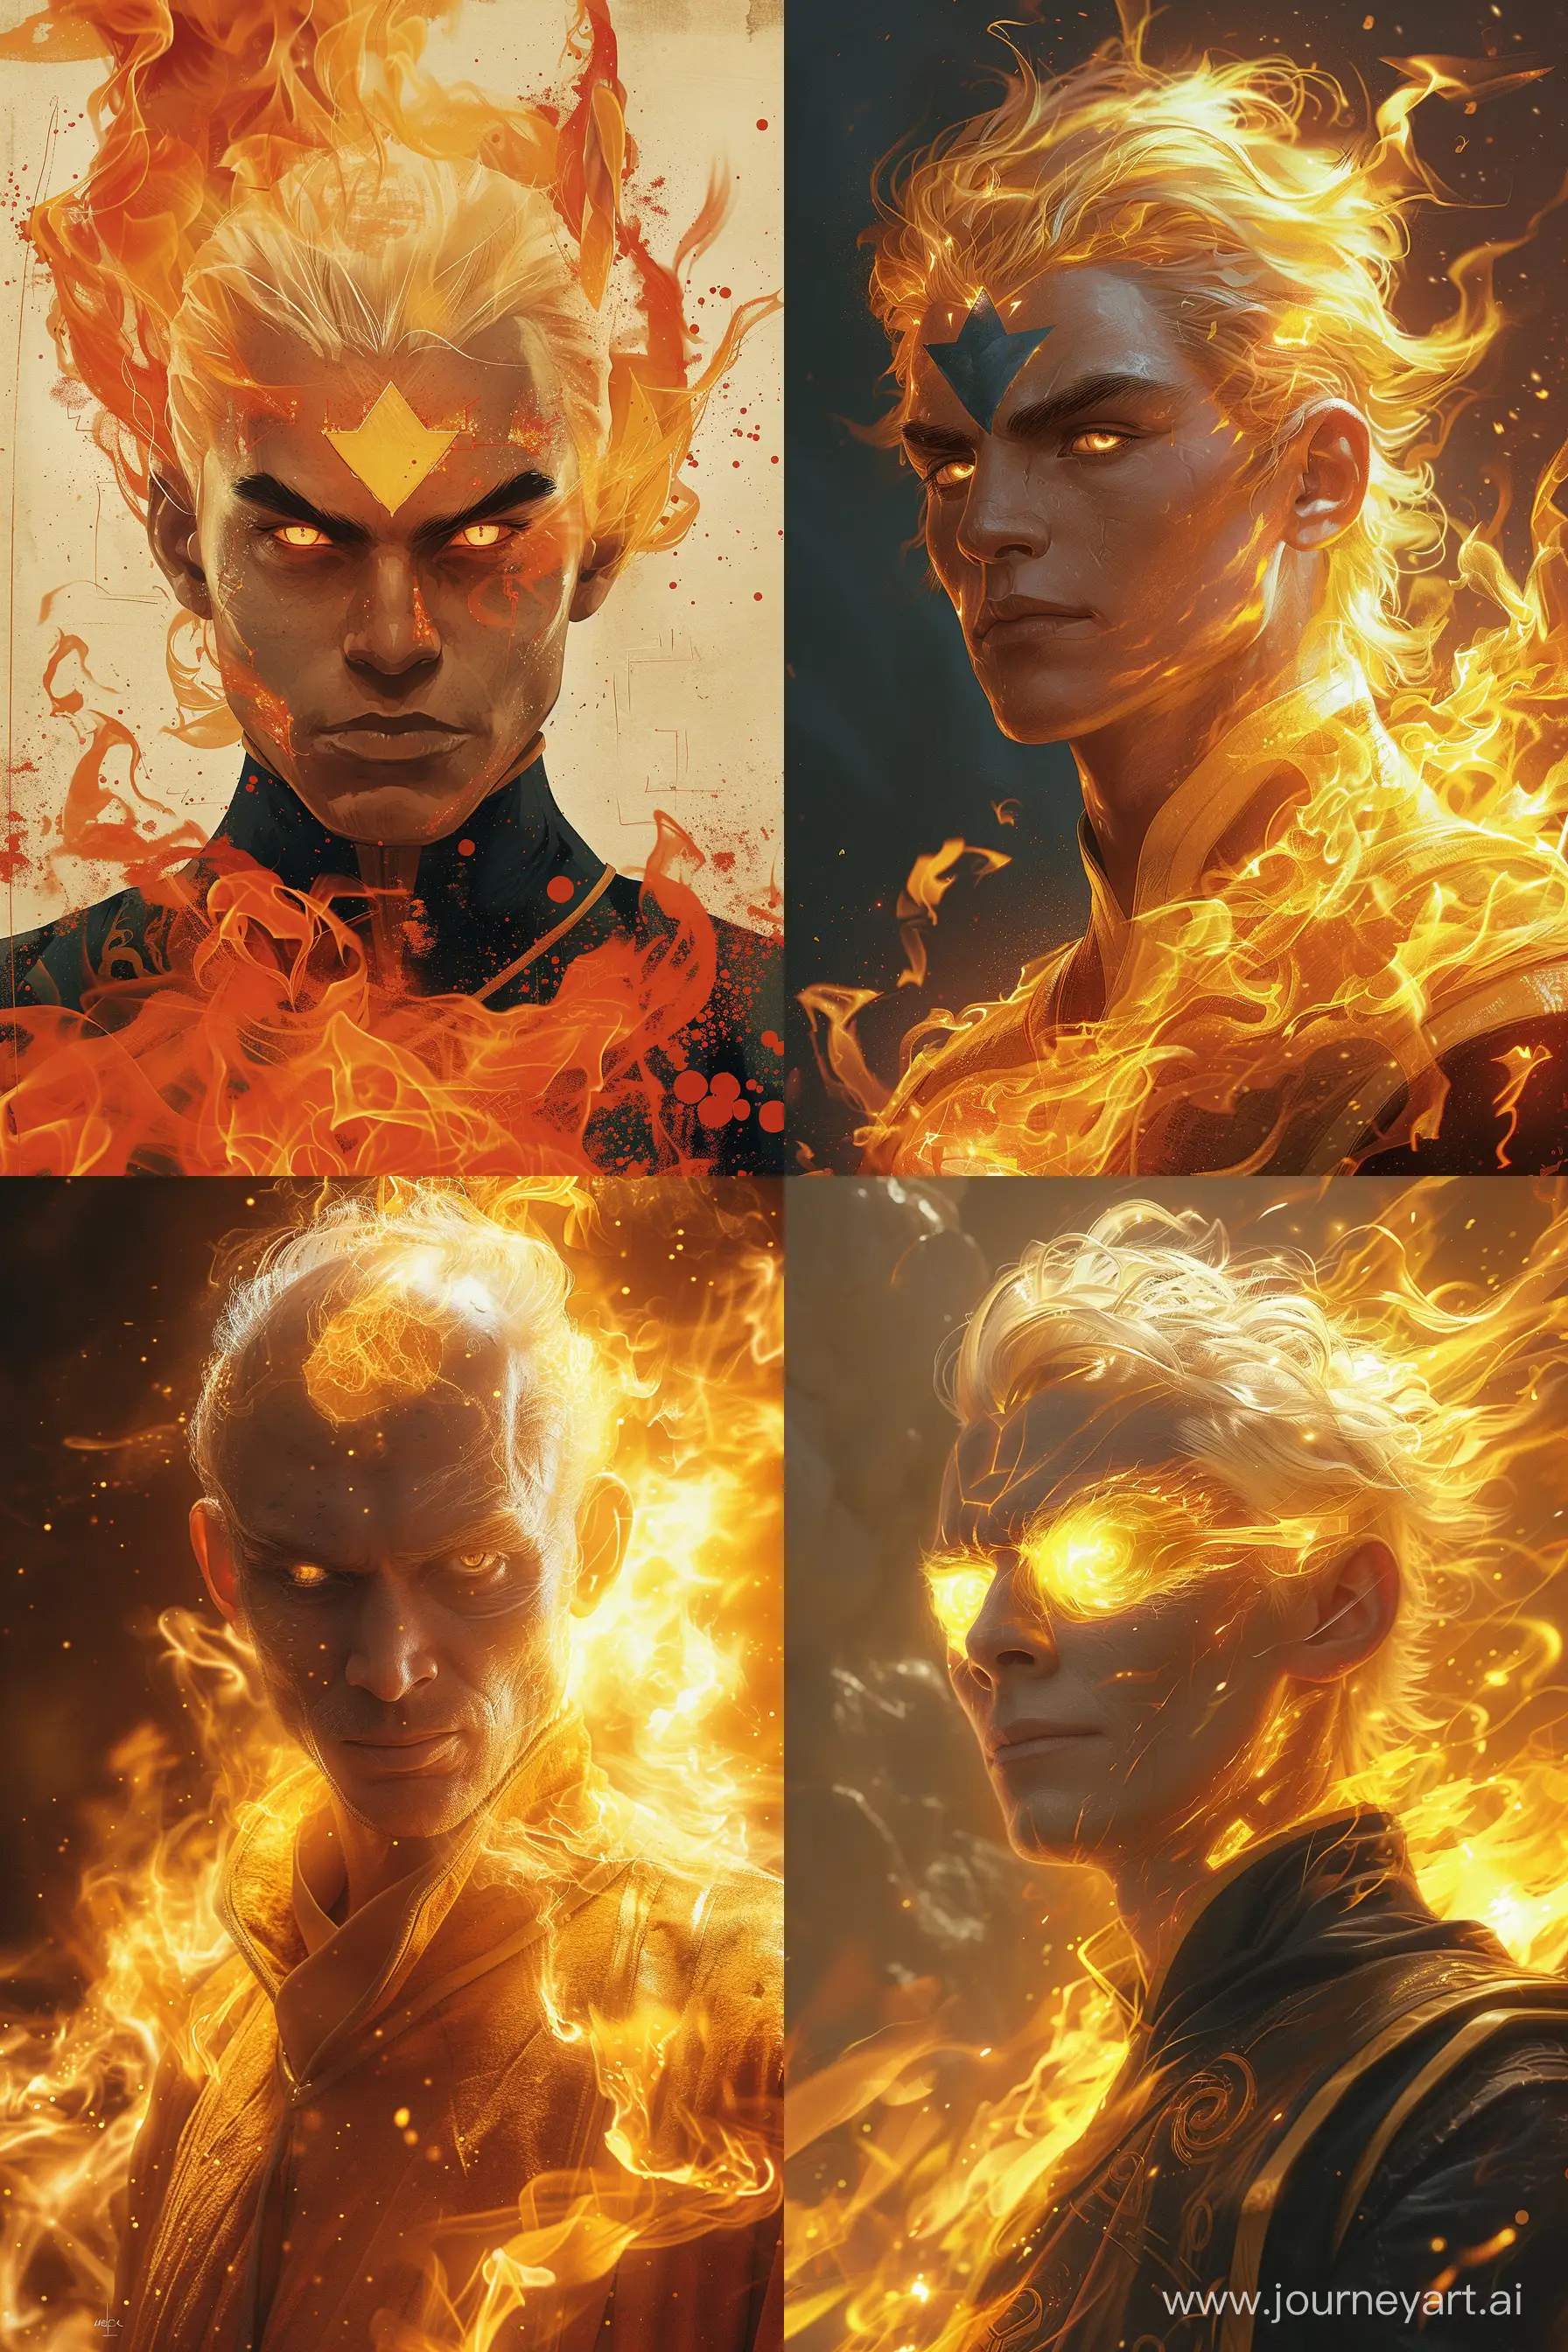 Portrait-of-Fire-Lord-from-the-Fire-Nation-Avatar-The-Last-Airbender-Fan-Art